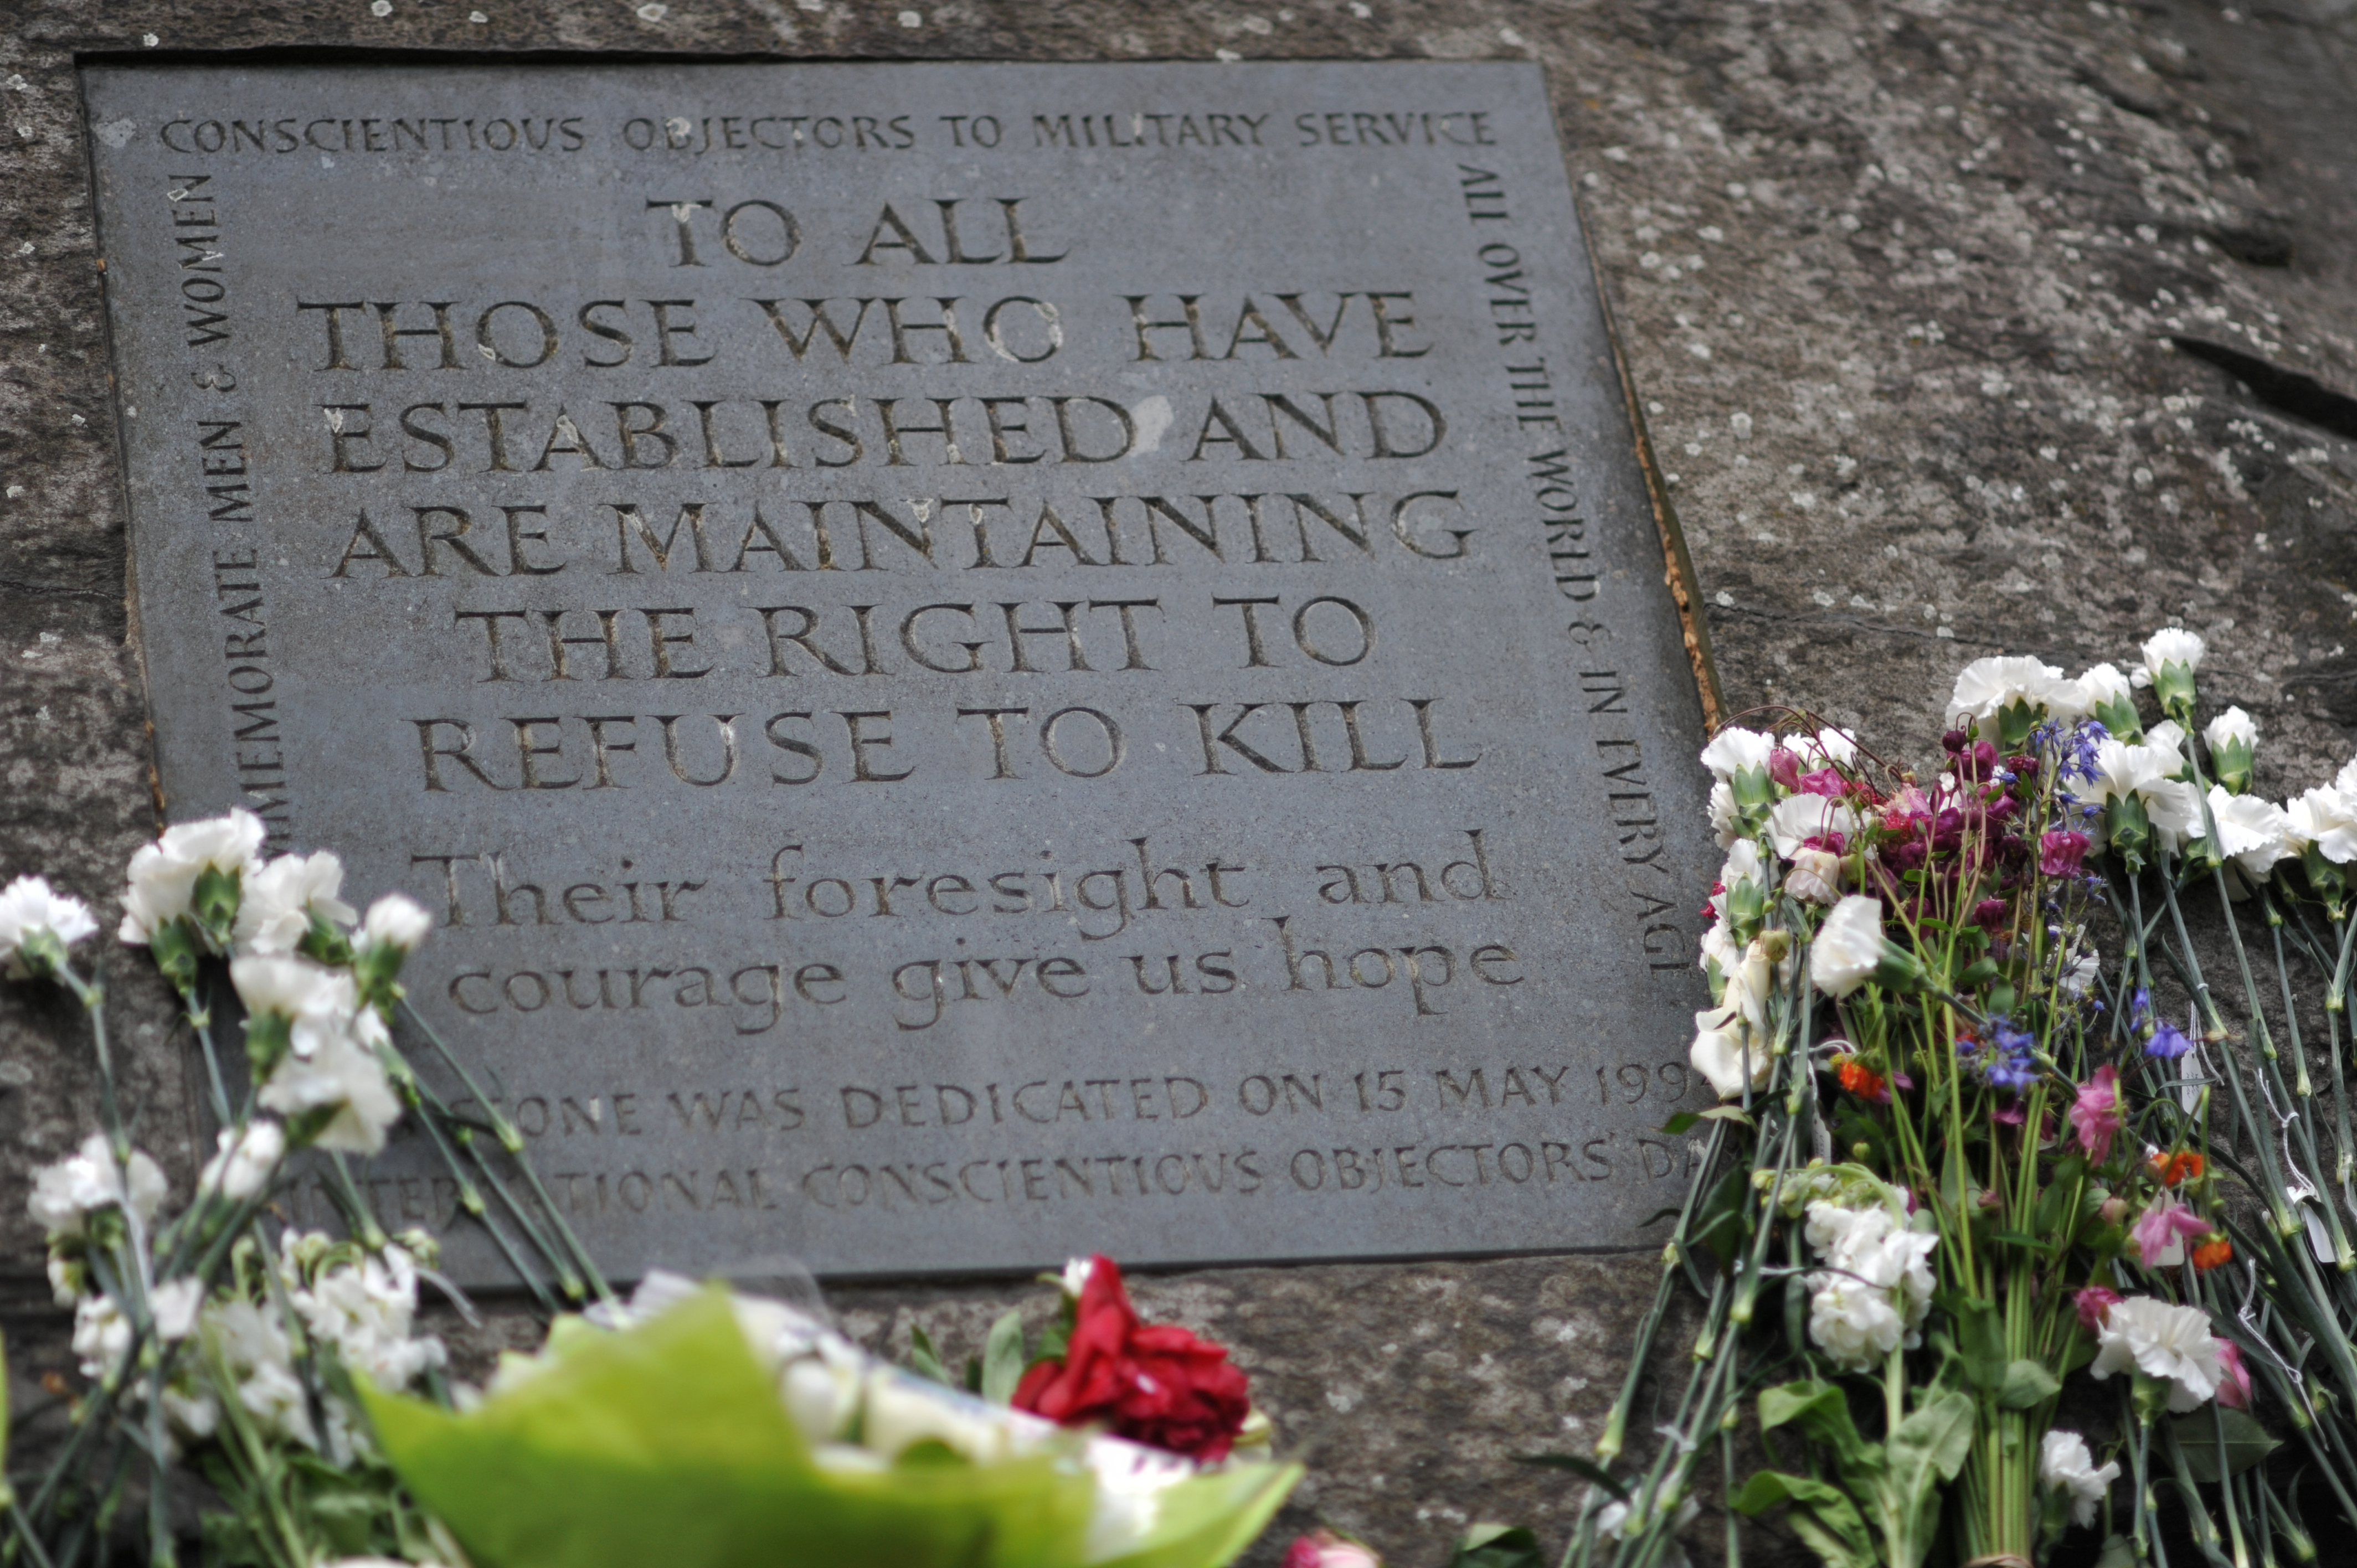 Conscientious objectors memorial stone to all those who have established and are maintaining the right to refuse to kill